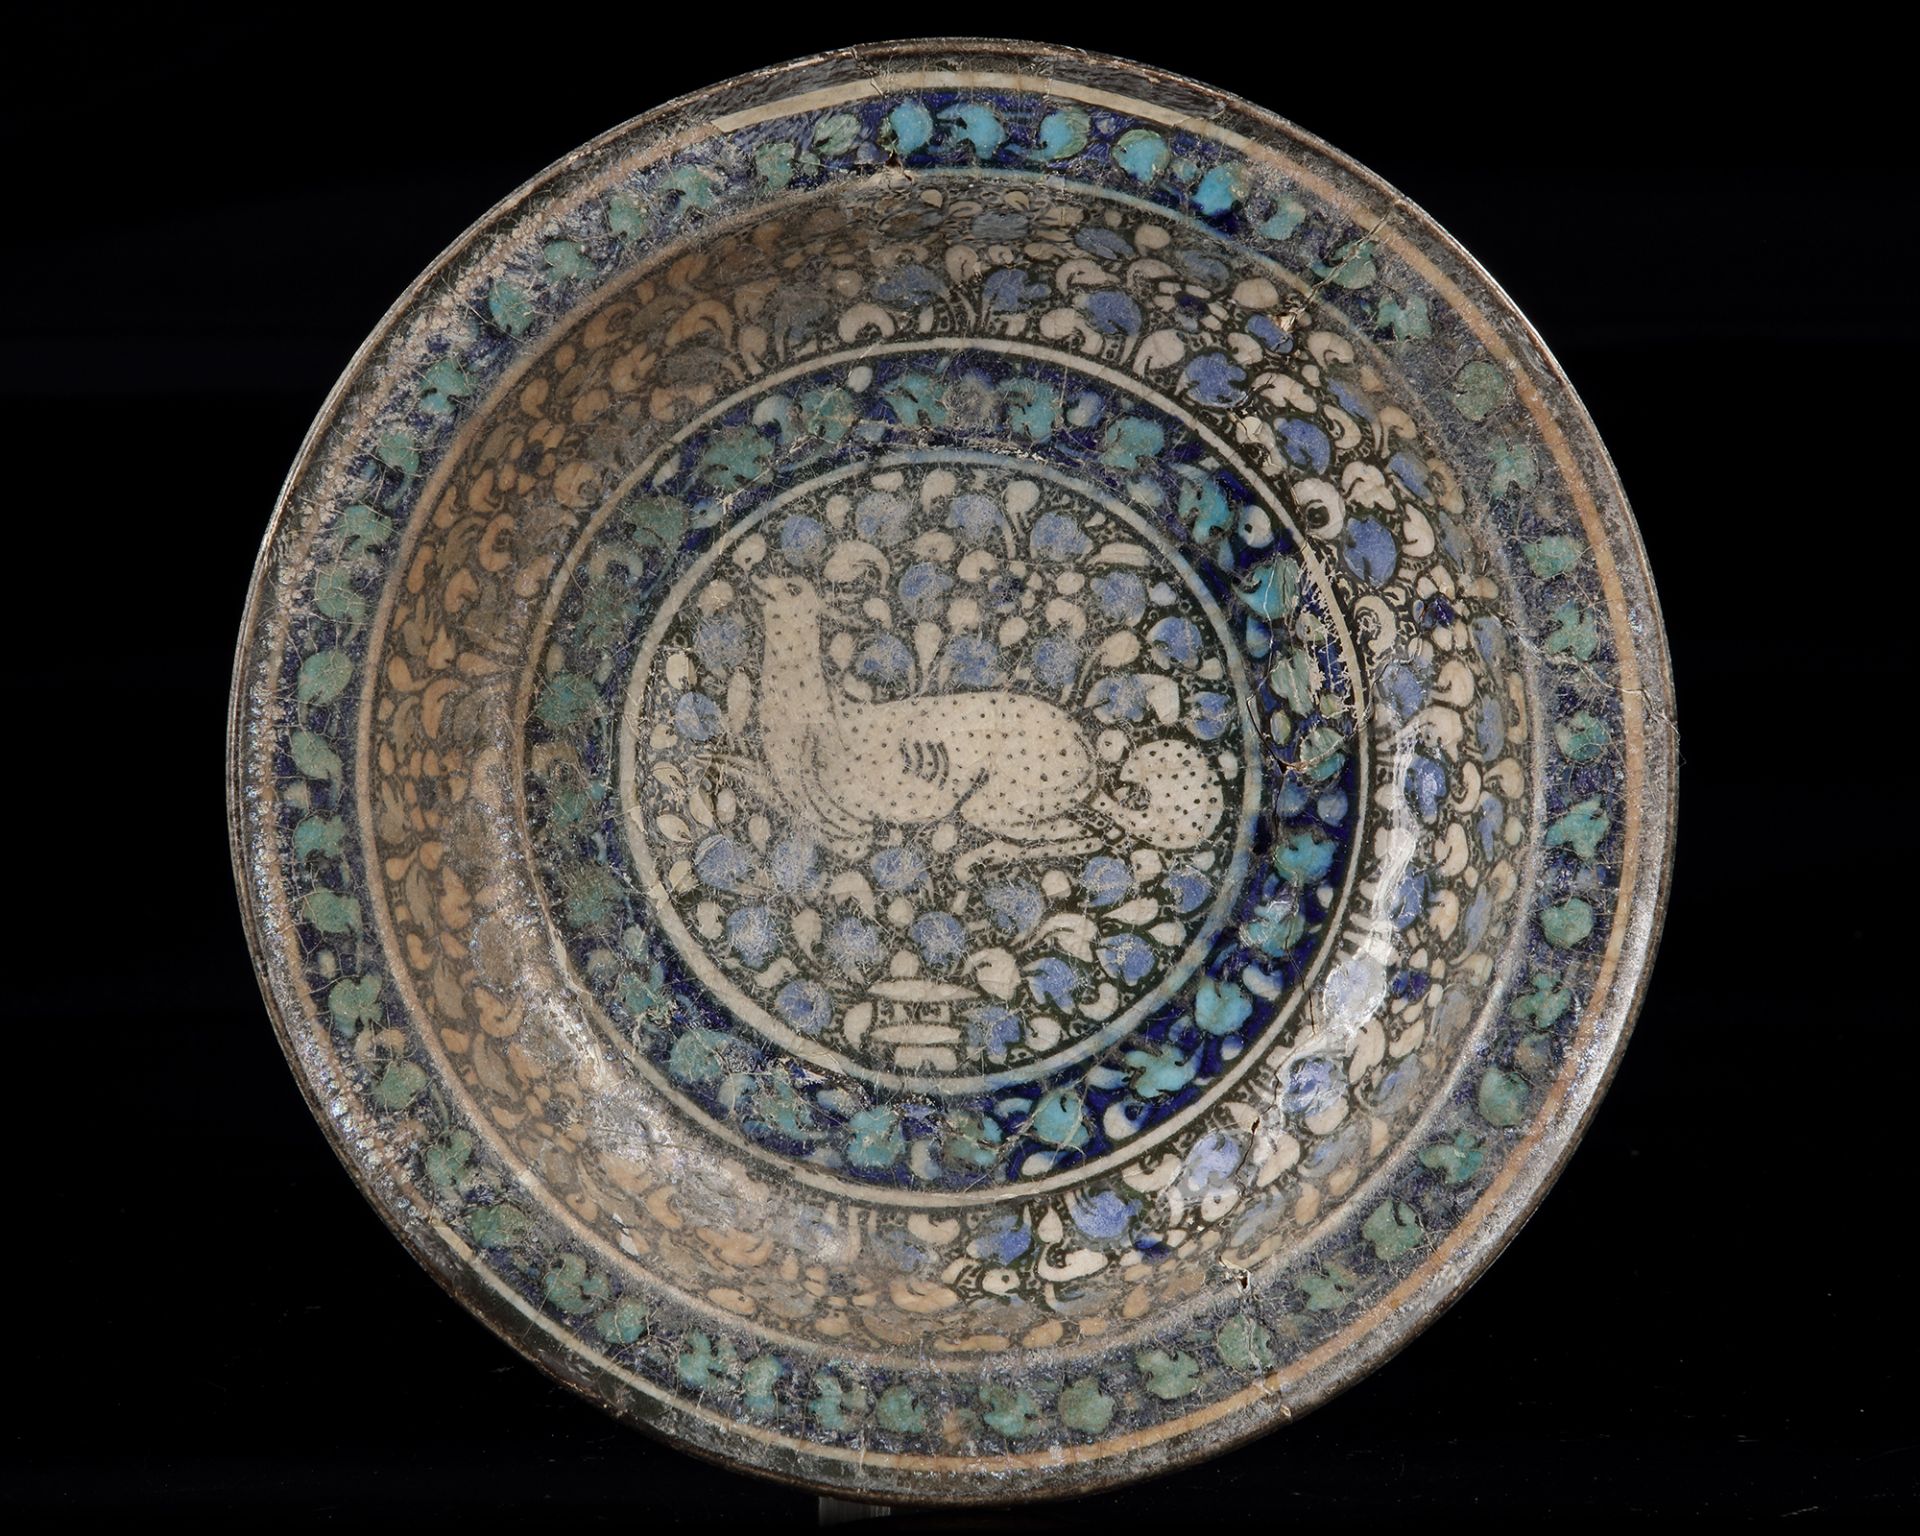 A SULTANABAD POTTERY DISH, NORTH PERSIA, LATE 13TH-EARLY 14TH CENTURY